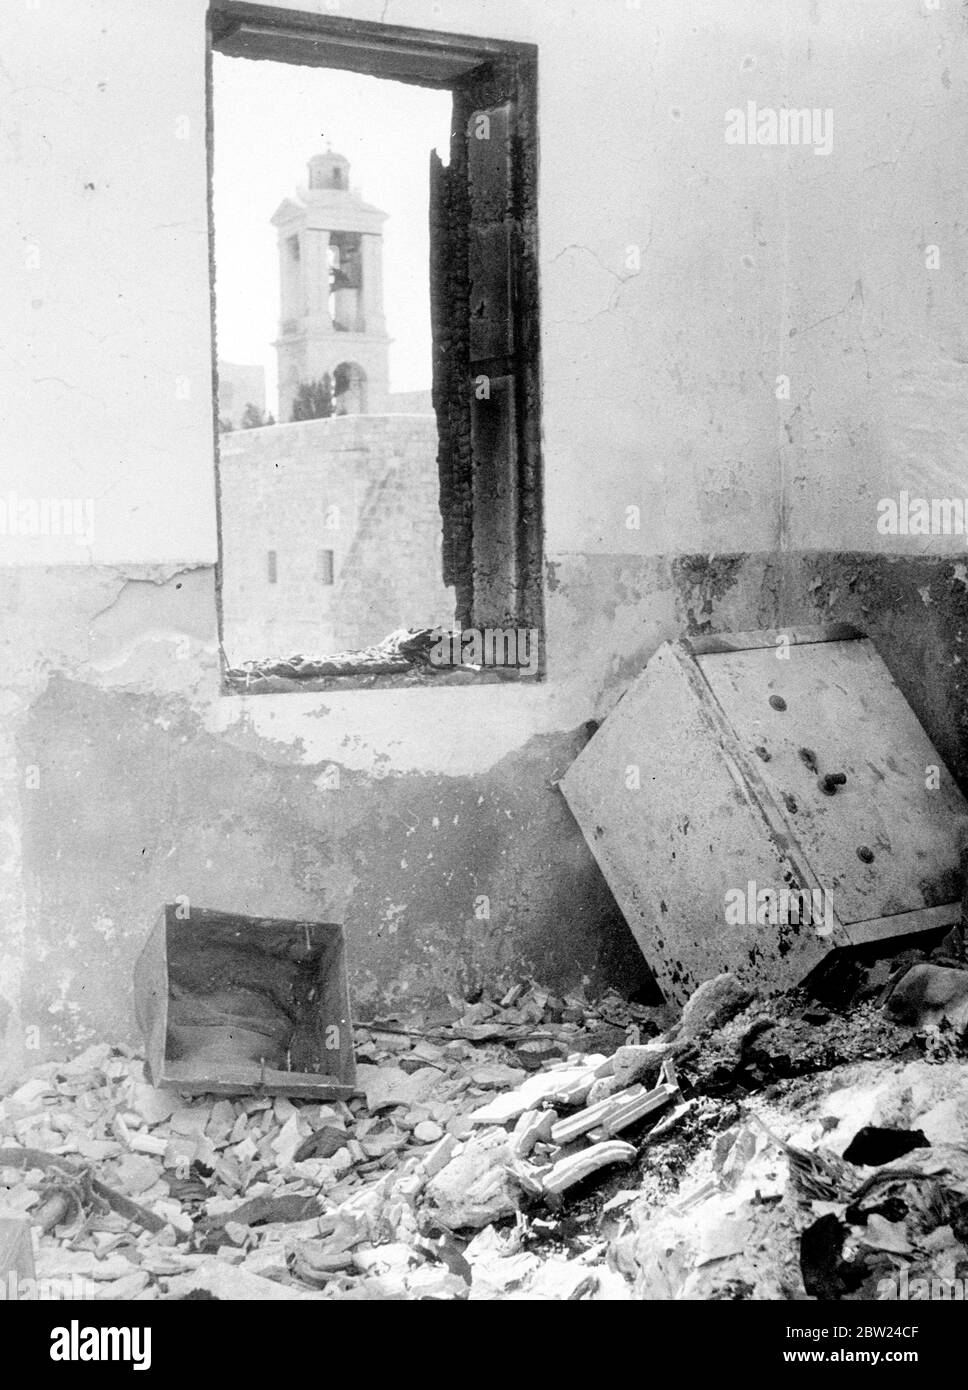 The most daring exploit so far of the Arab rebels in Palestine was the invasion of Bethlehem. The chief object of attack was the post office in police station, both have been gutted during the rebels occupation of the city. The police station was situate where Christ was born. Photo shows: A scorched safe amid the ruins of the first floor of the police station building which was given over to the law court. All official records of civil and criminal cases were destroyed in the fire. Through the window is seen one of the towers of the Church of the Nativity. 19 September 1938 Stock Photo